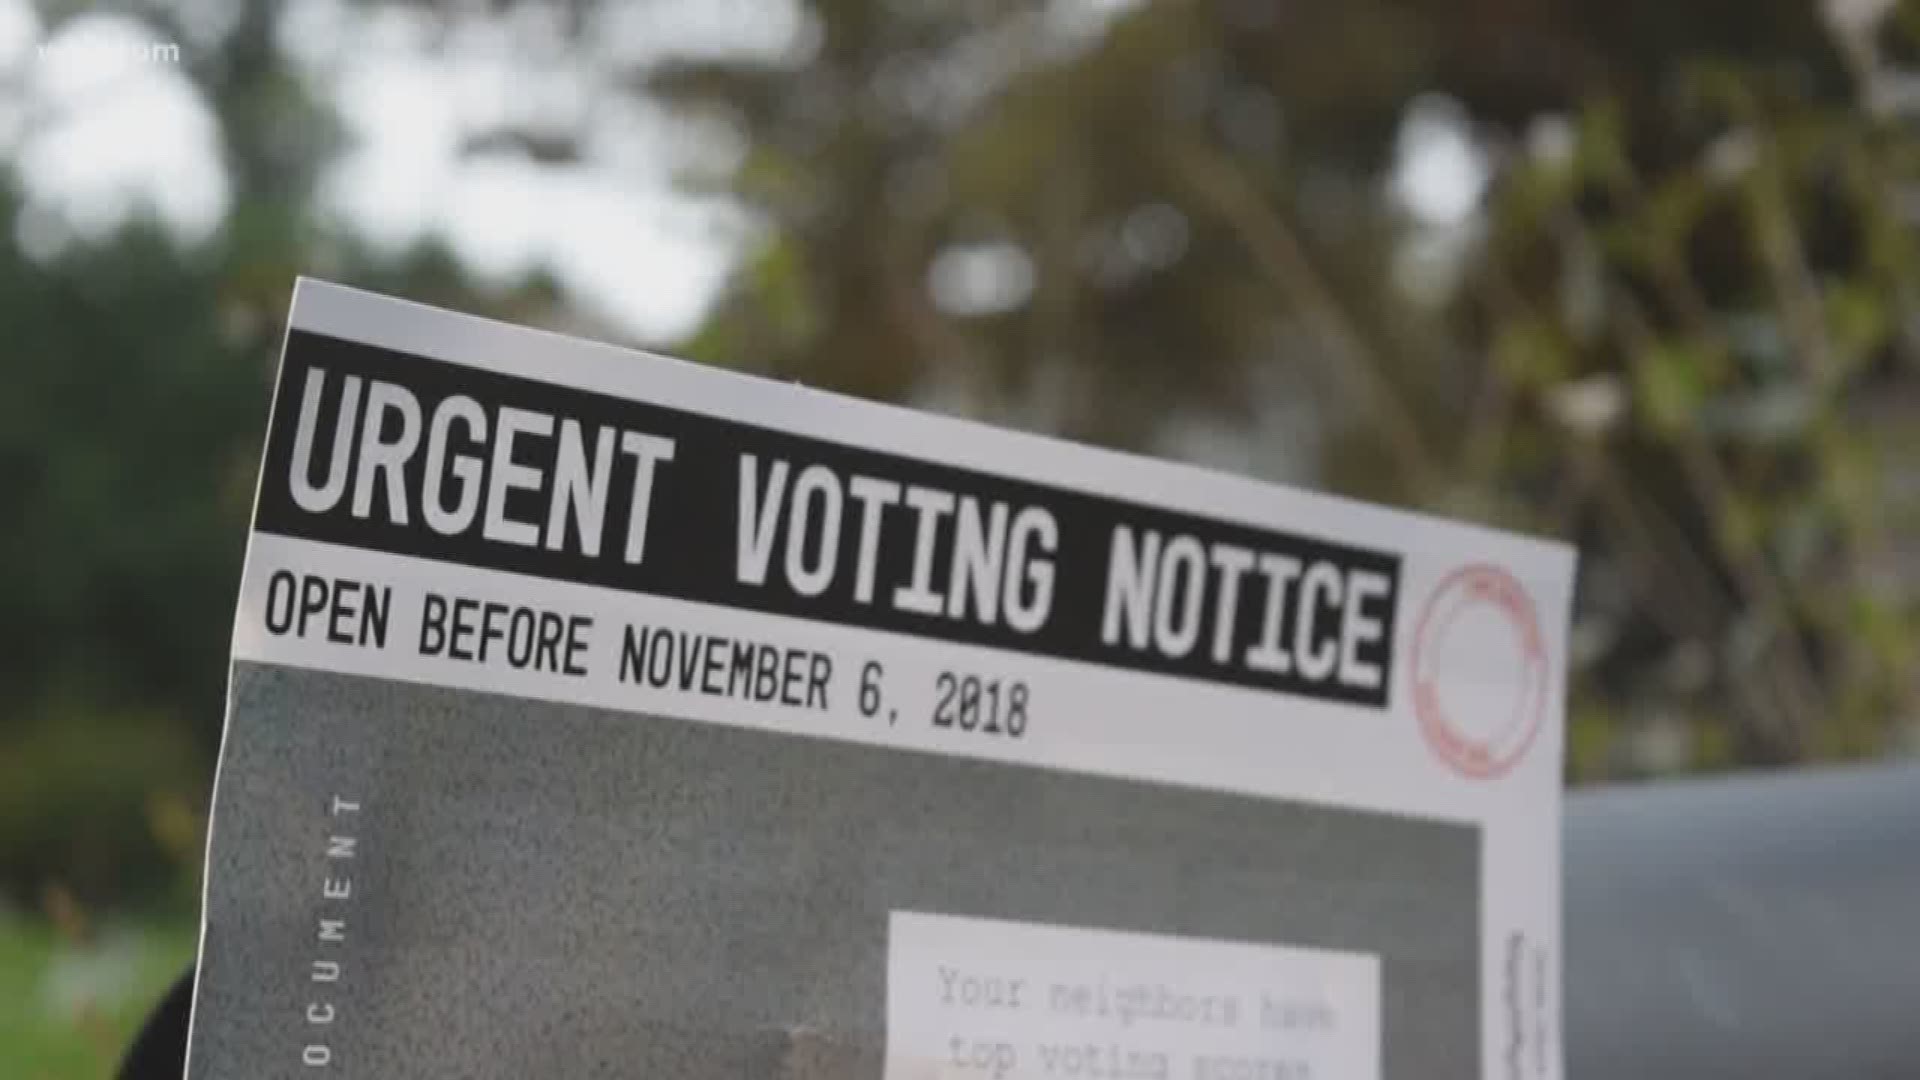 As election day approaches, you're probably noticing more candidate signs and more election pamphlets in your mailbox. But, there's one piece of mail that some say is an example of voter shaming.